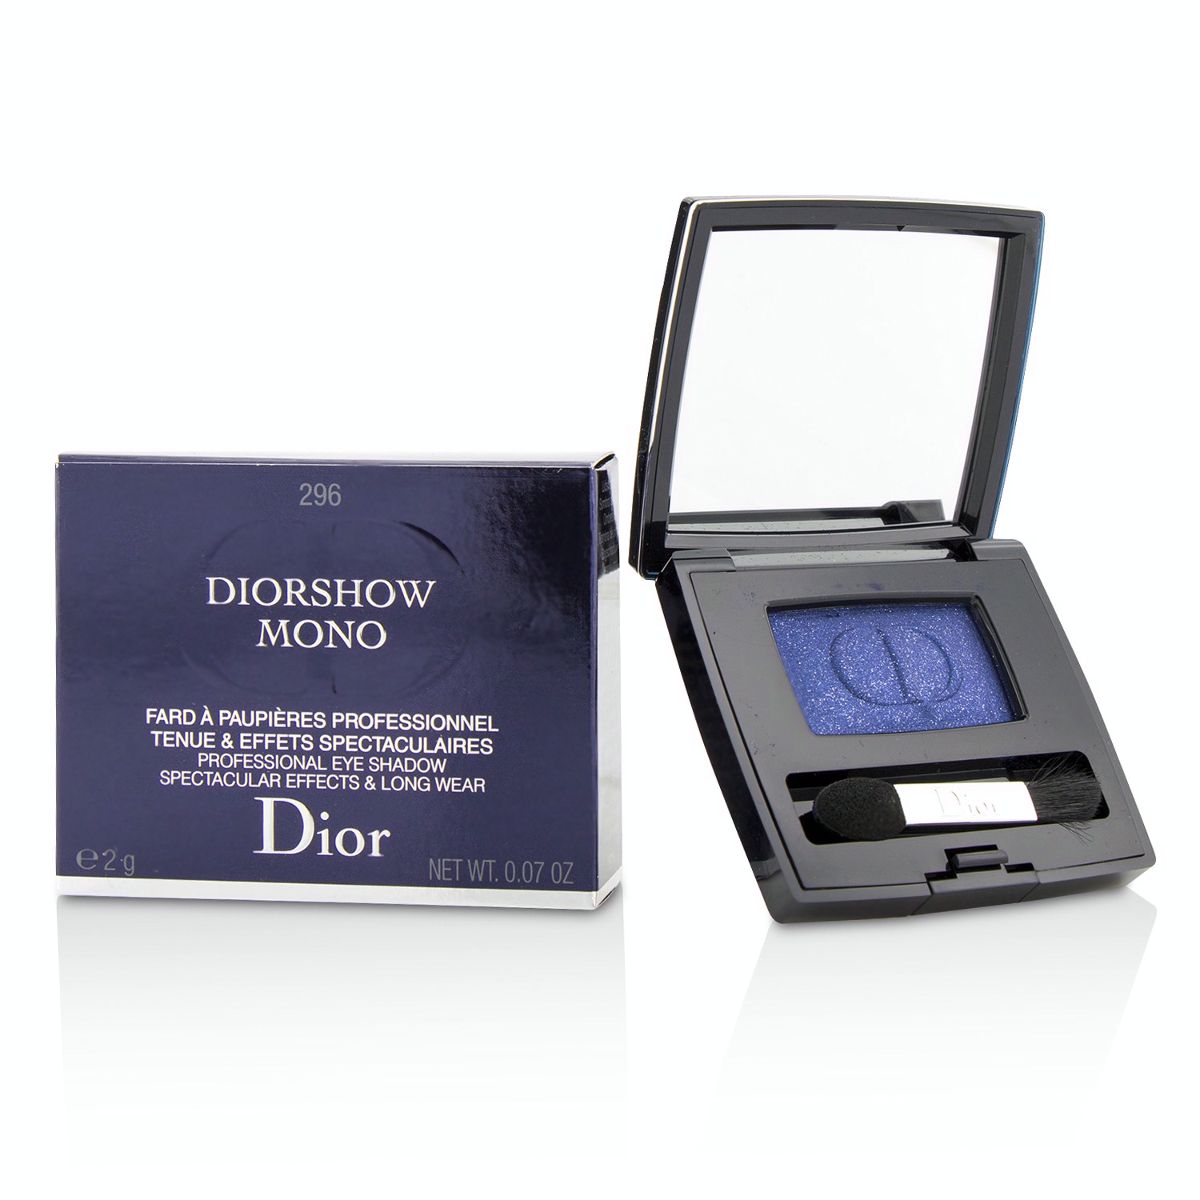 Diorshow Mono Professional Spectacular Effects  Long Wear Eyeshadow - # 296 Show Christian Dior Image